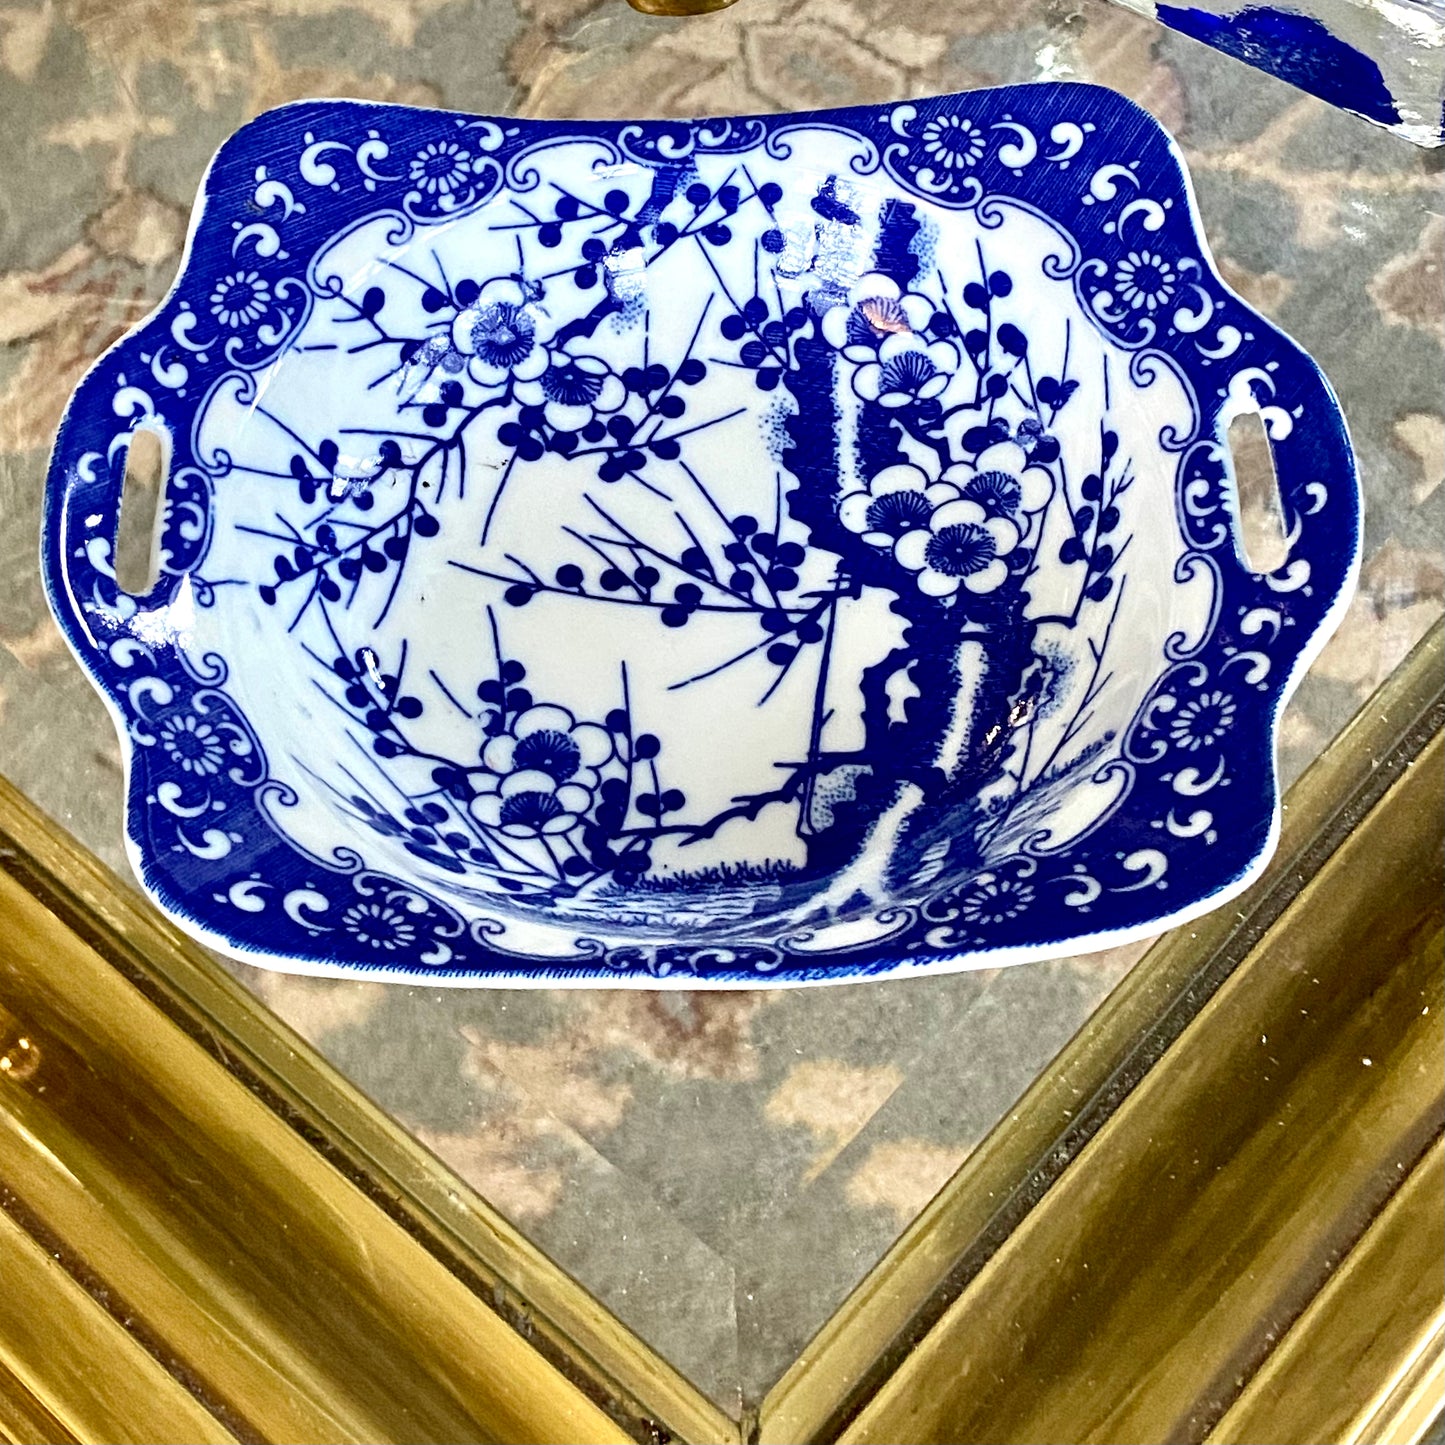 Beautiful cobalt blue and white porcelain cherry blossom double handle dish